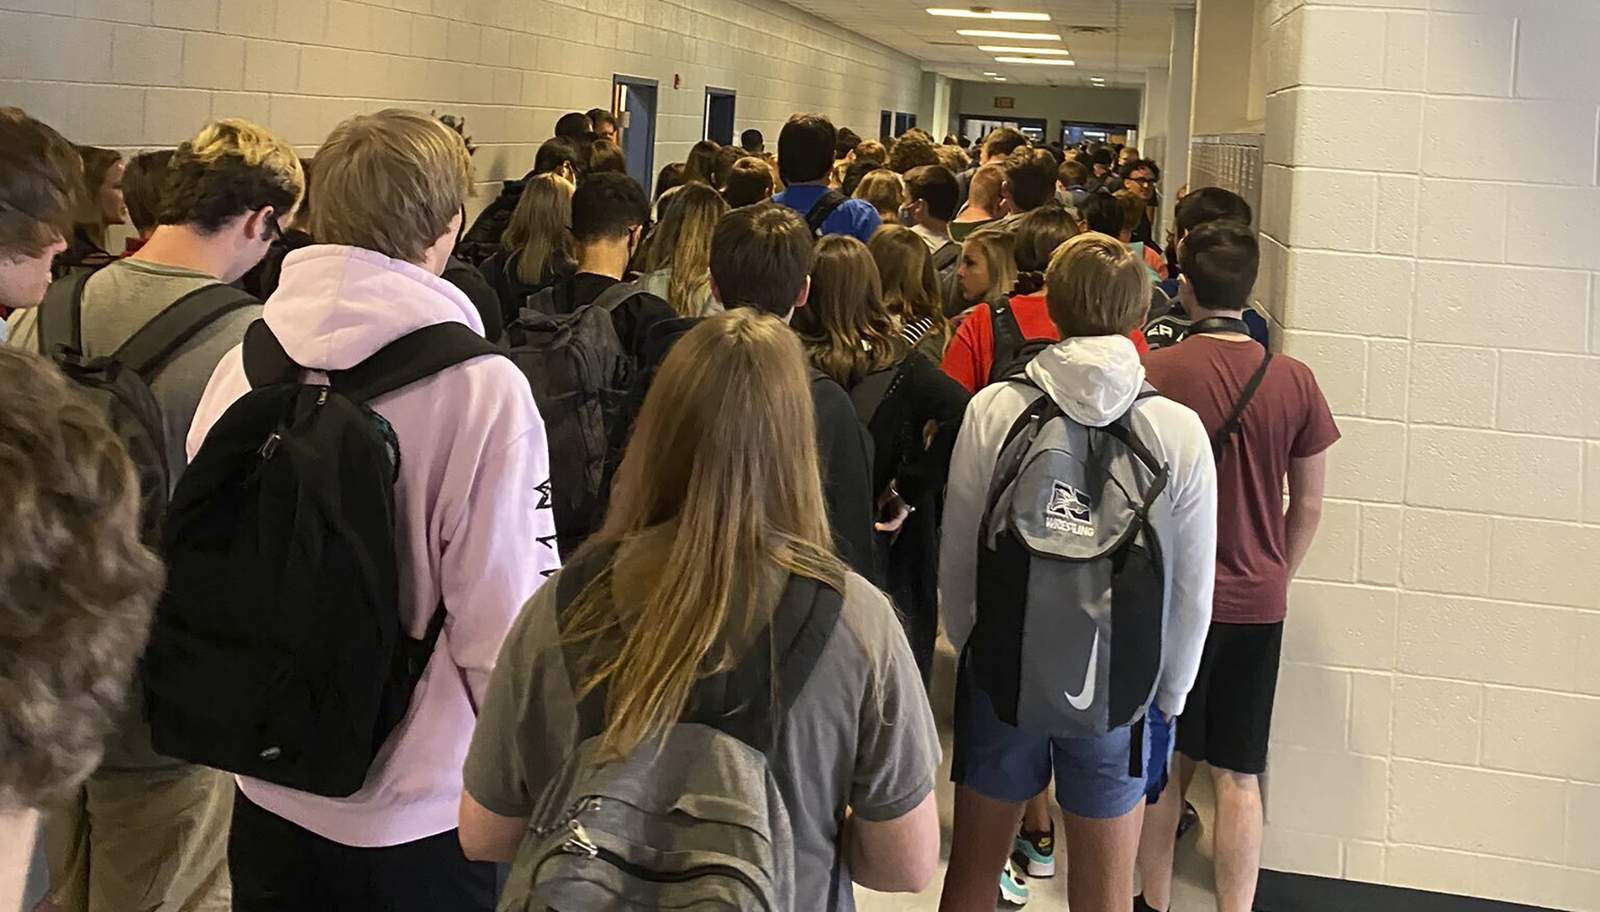 Suspension lifted for Georgia student who posted photo of overcrowded hall: report